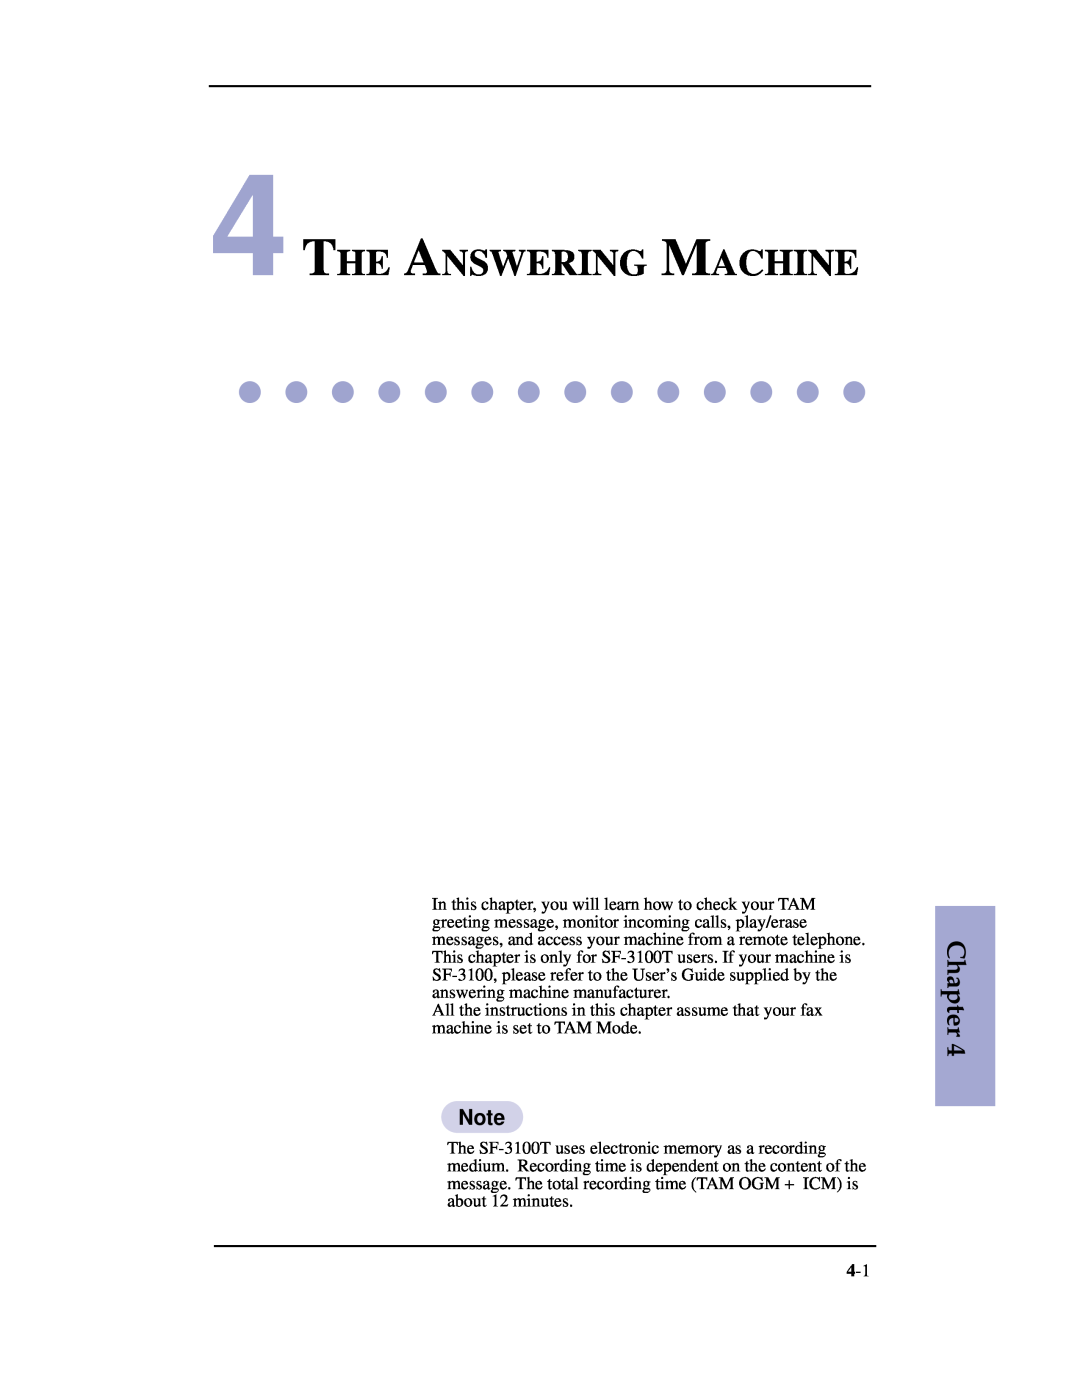 Samsung SF-3100 manual The Answering Machine, Chapter 